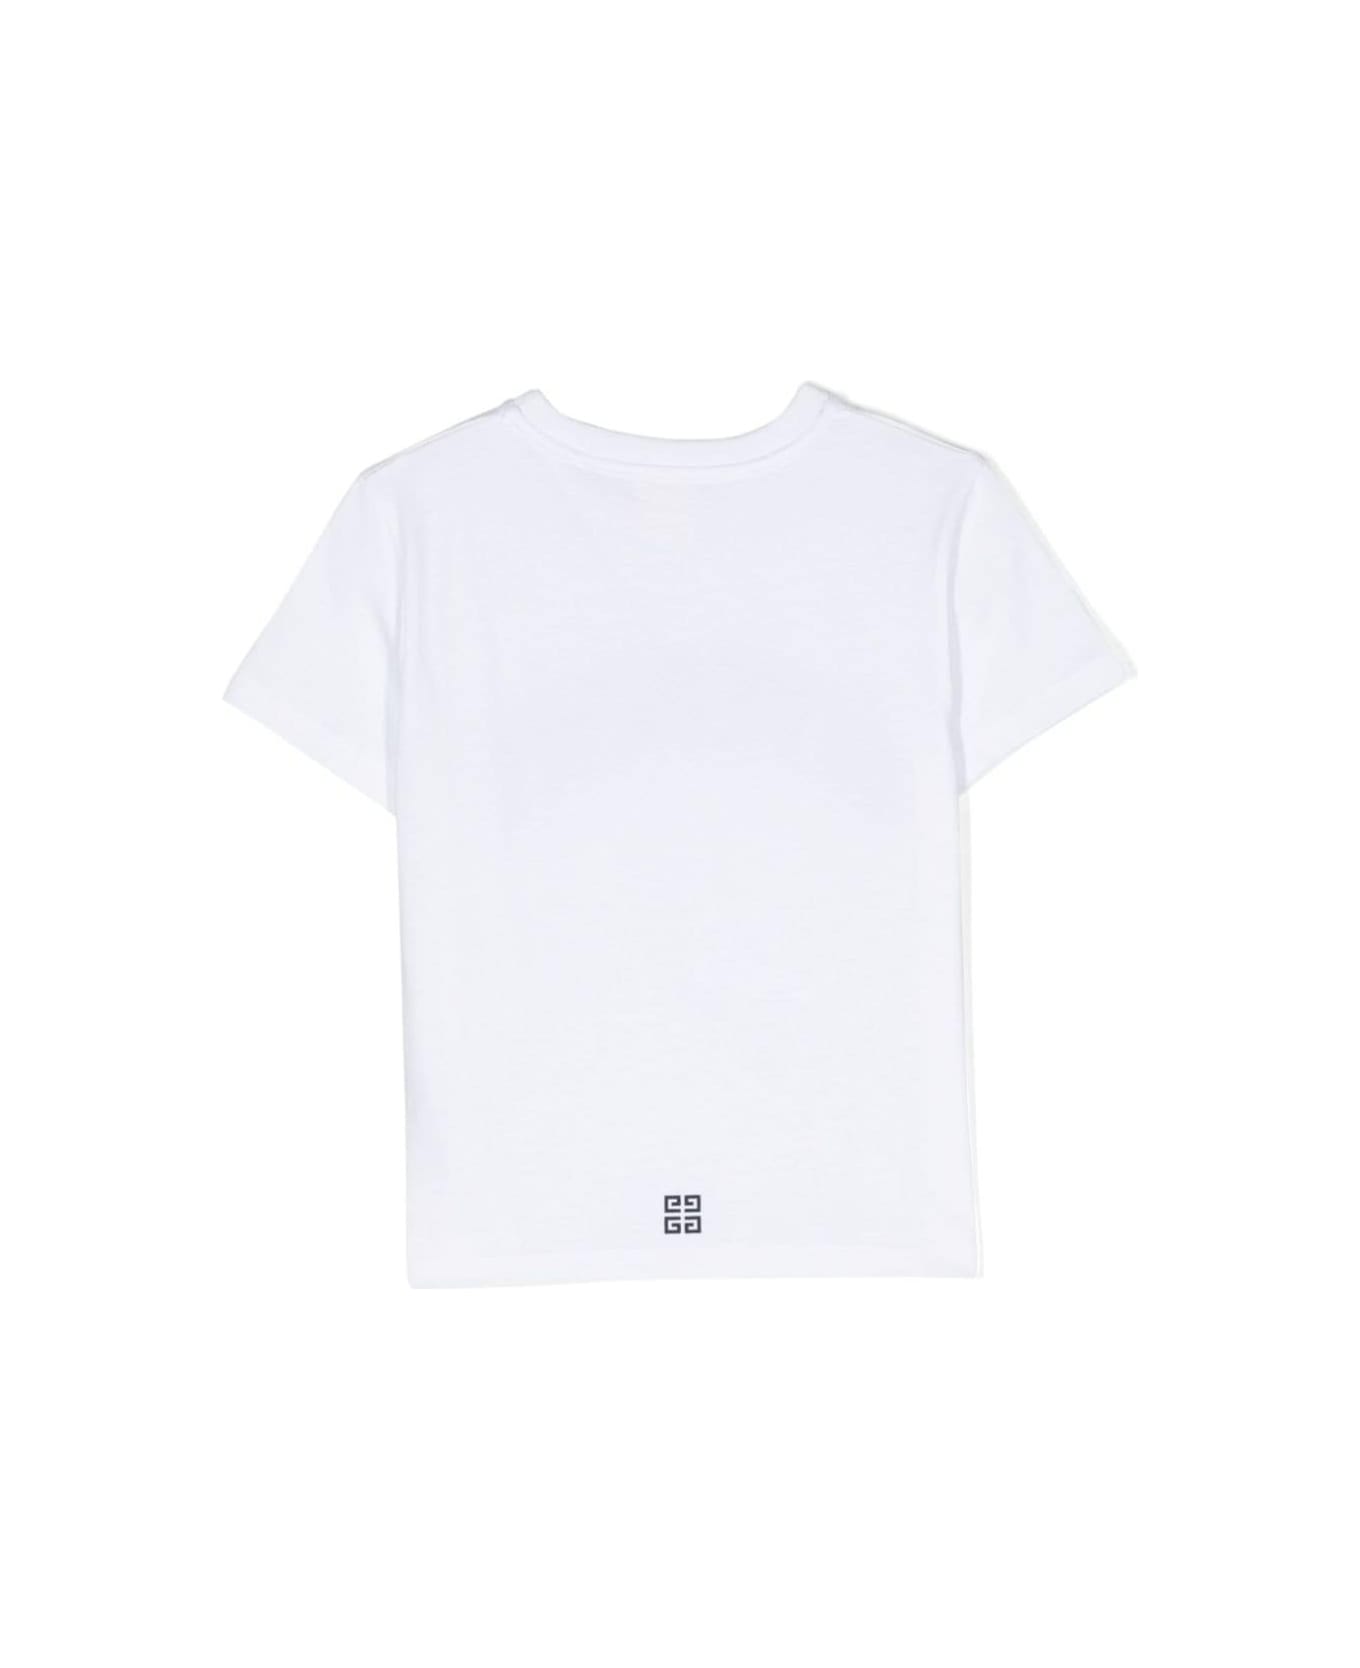 Givenchy White Crewneck T-shirt With Contrasting Logo Lettering Print In Cotton Boy - White